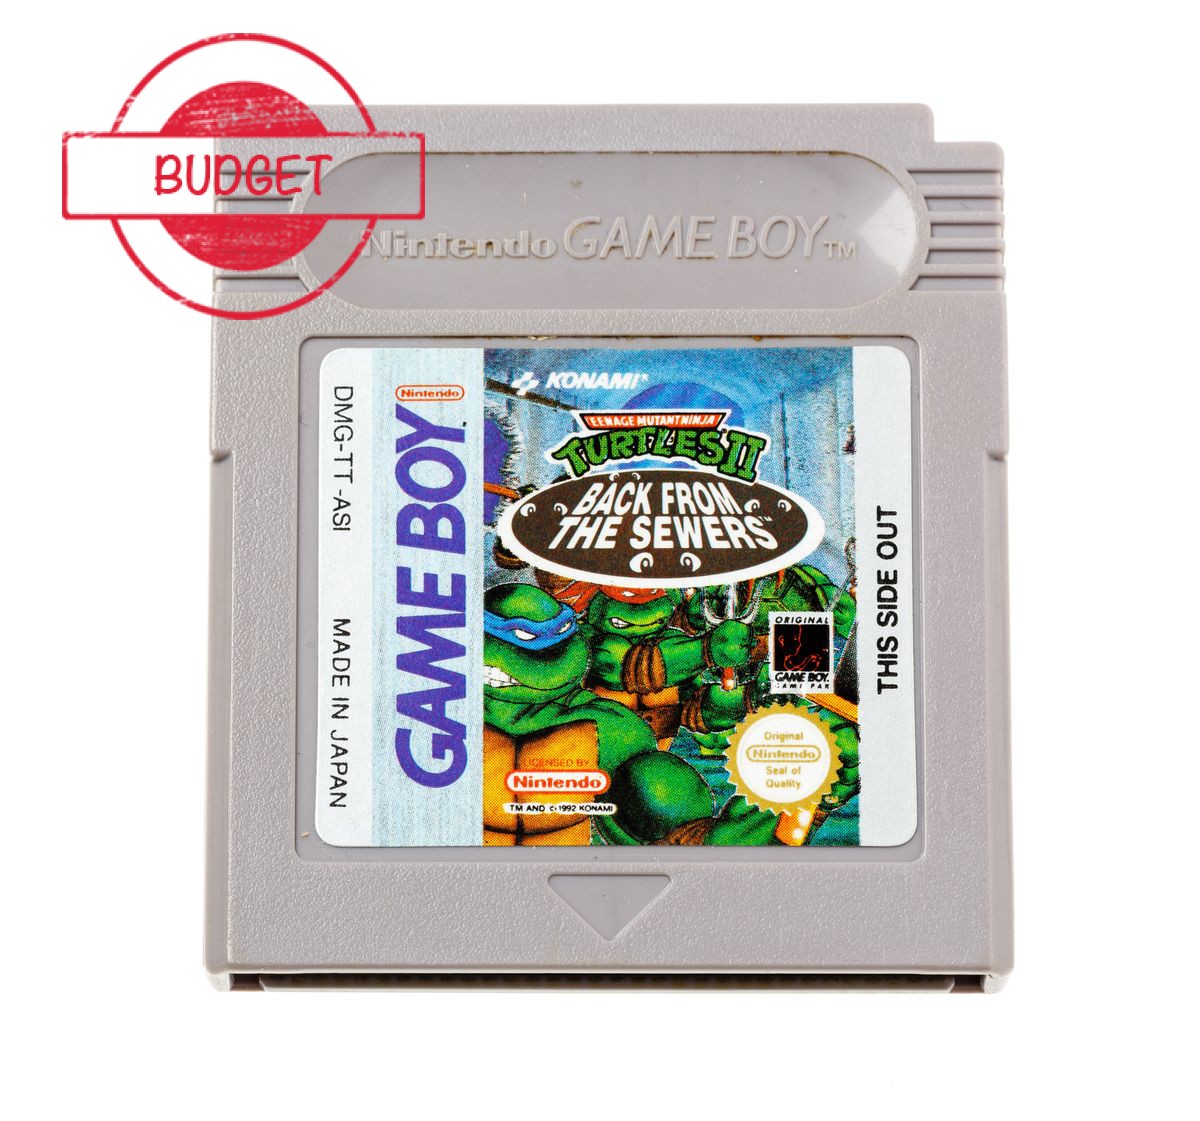 Turtles II Back from the Sewers - Budget Kopen | Gameboy Classic Games